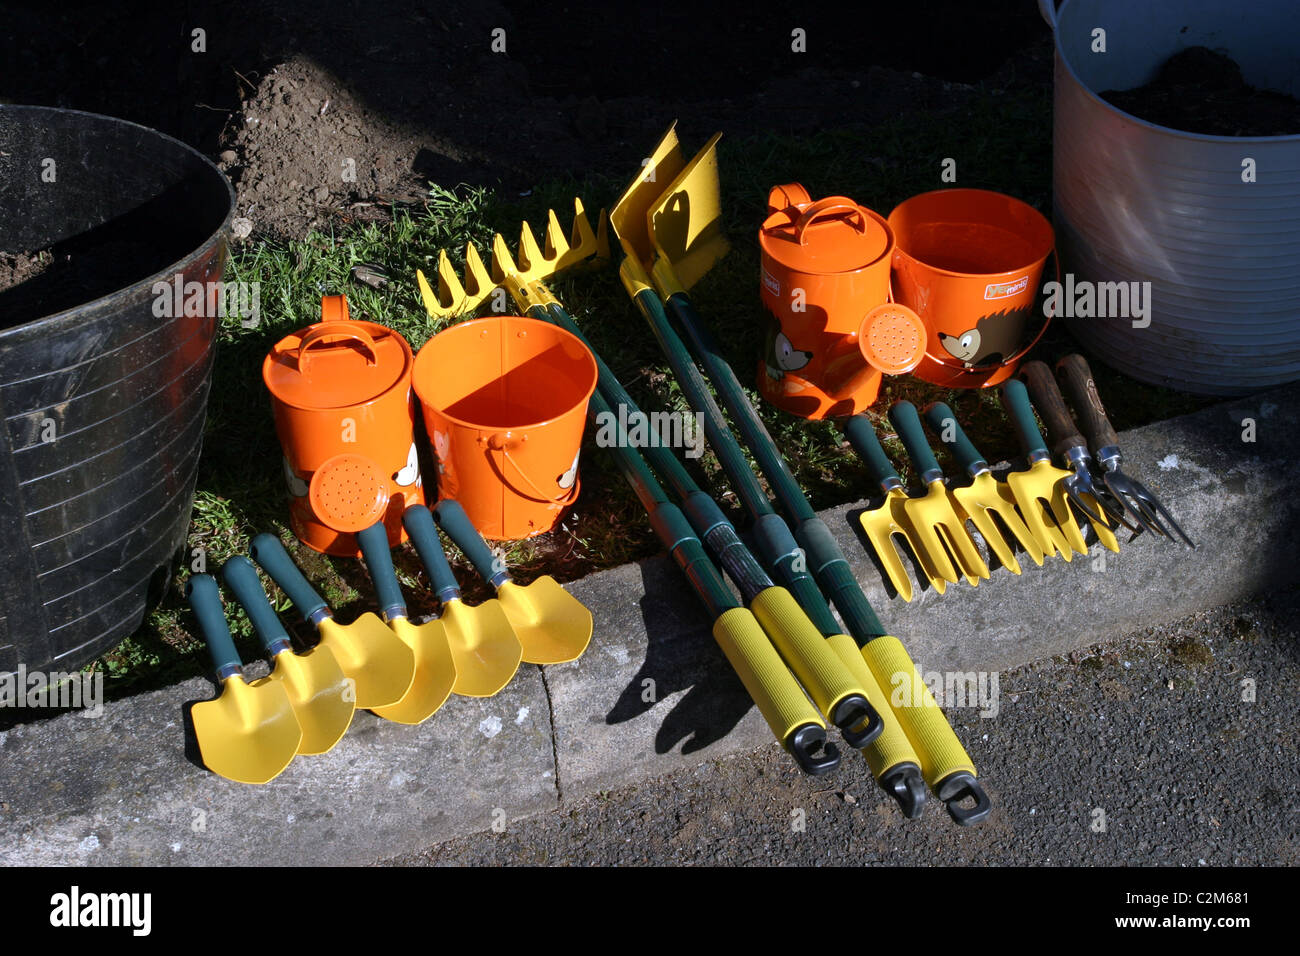 Kids Gardening Tools in a School Allotment Stock Photo